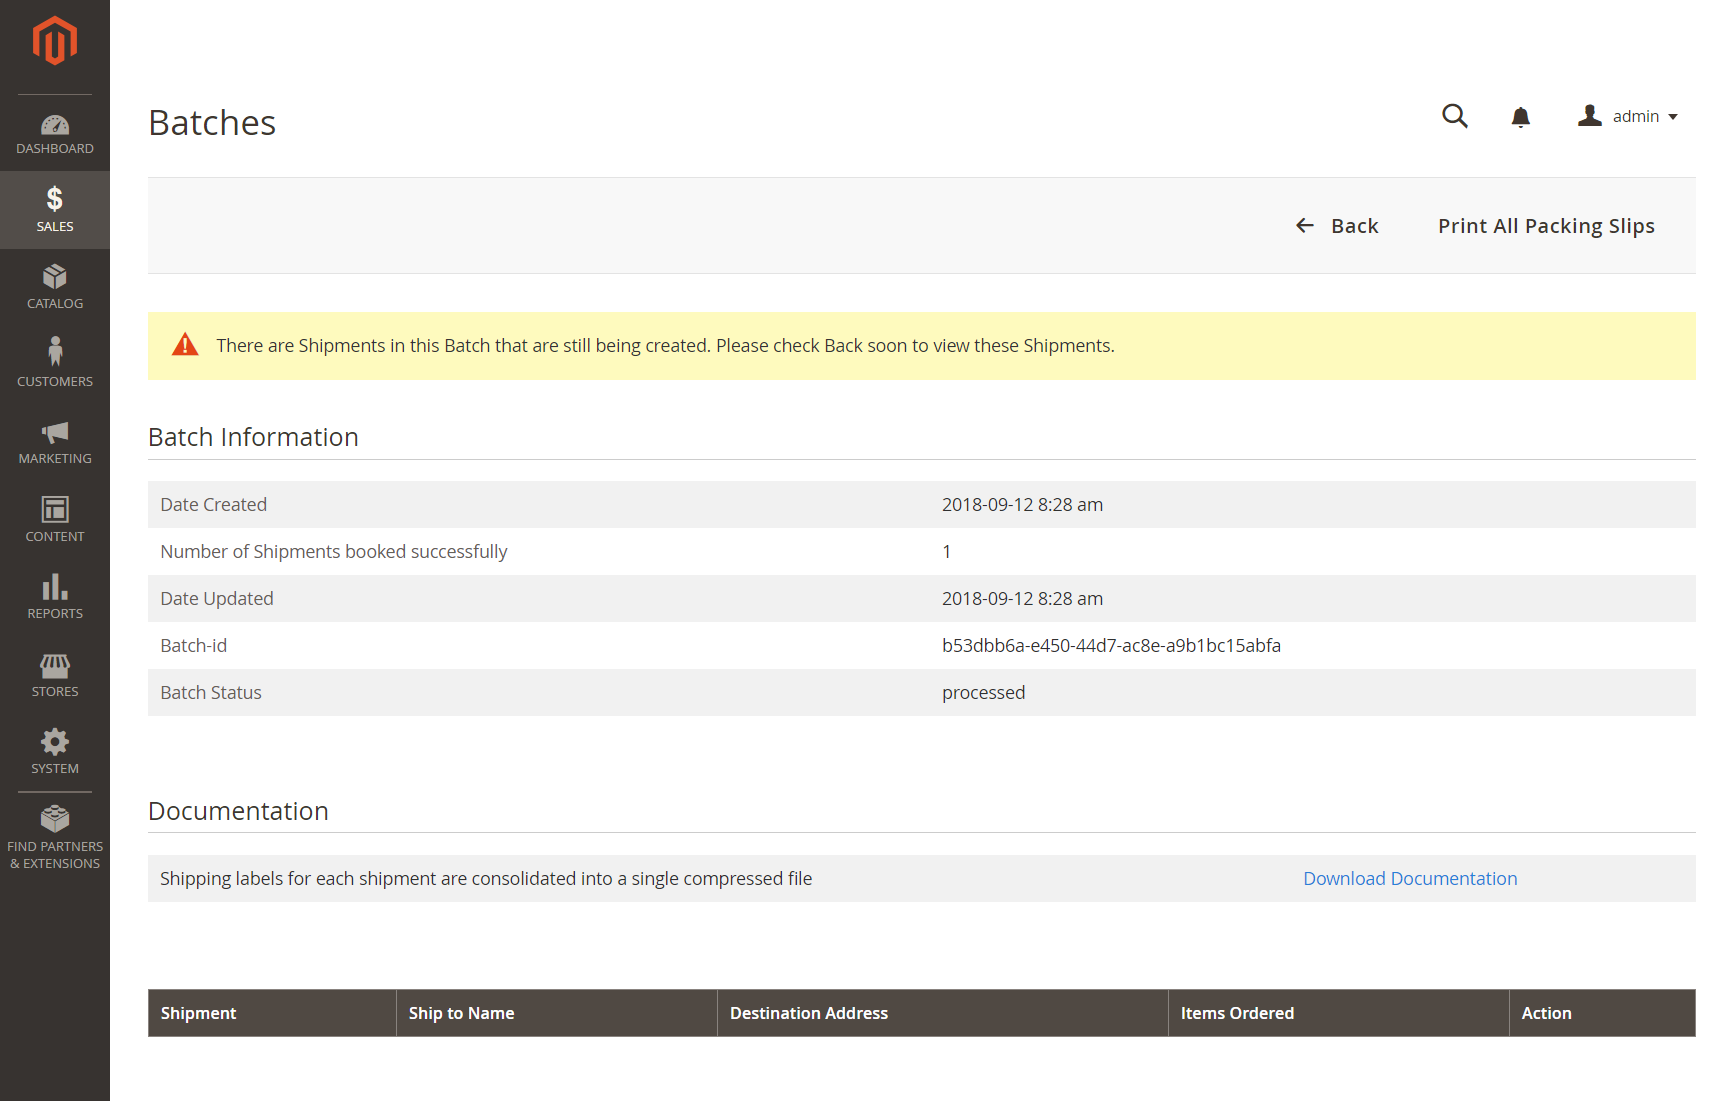 The Batch Detail page displays detailed information about the Magento Shipping batch